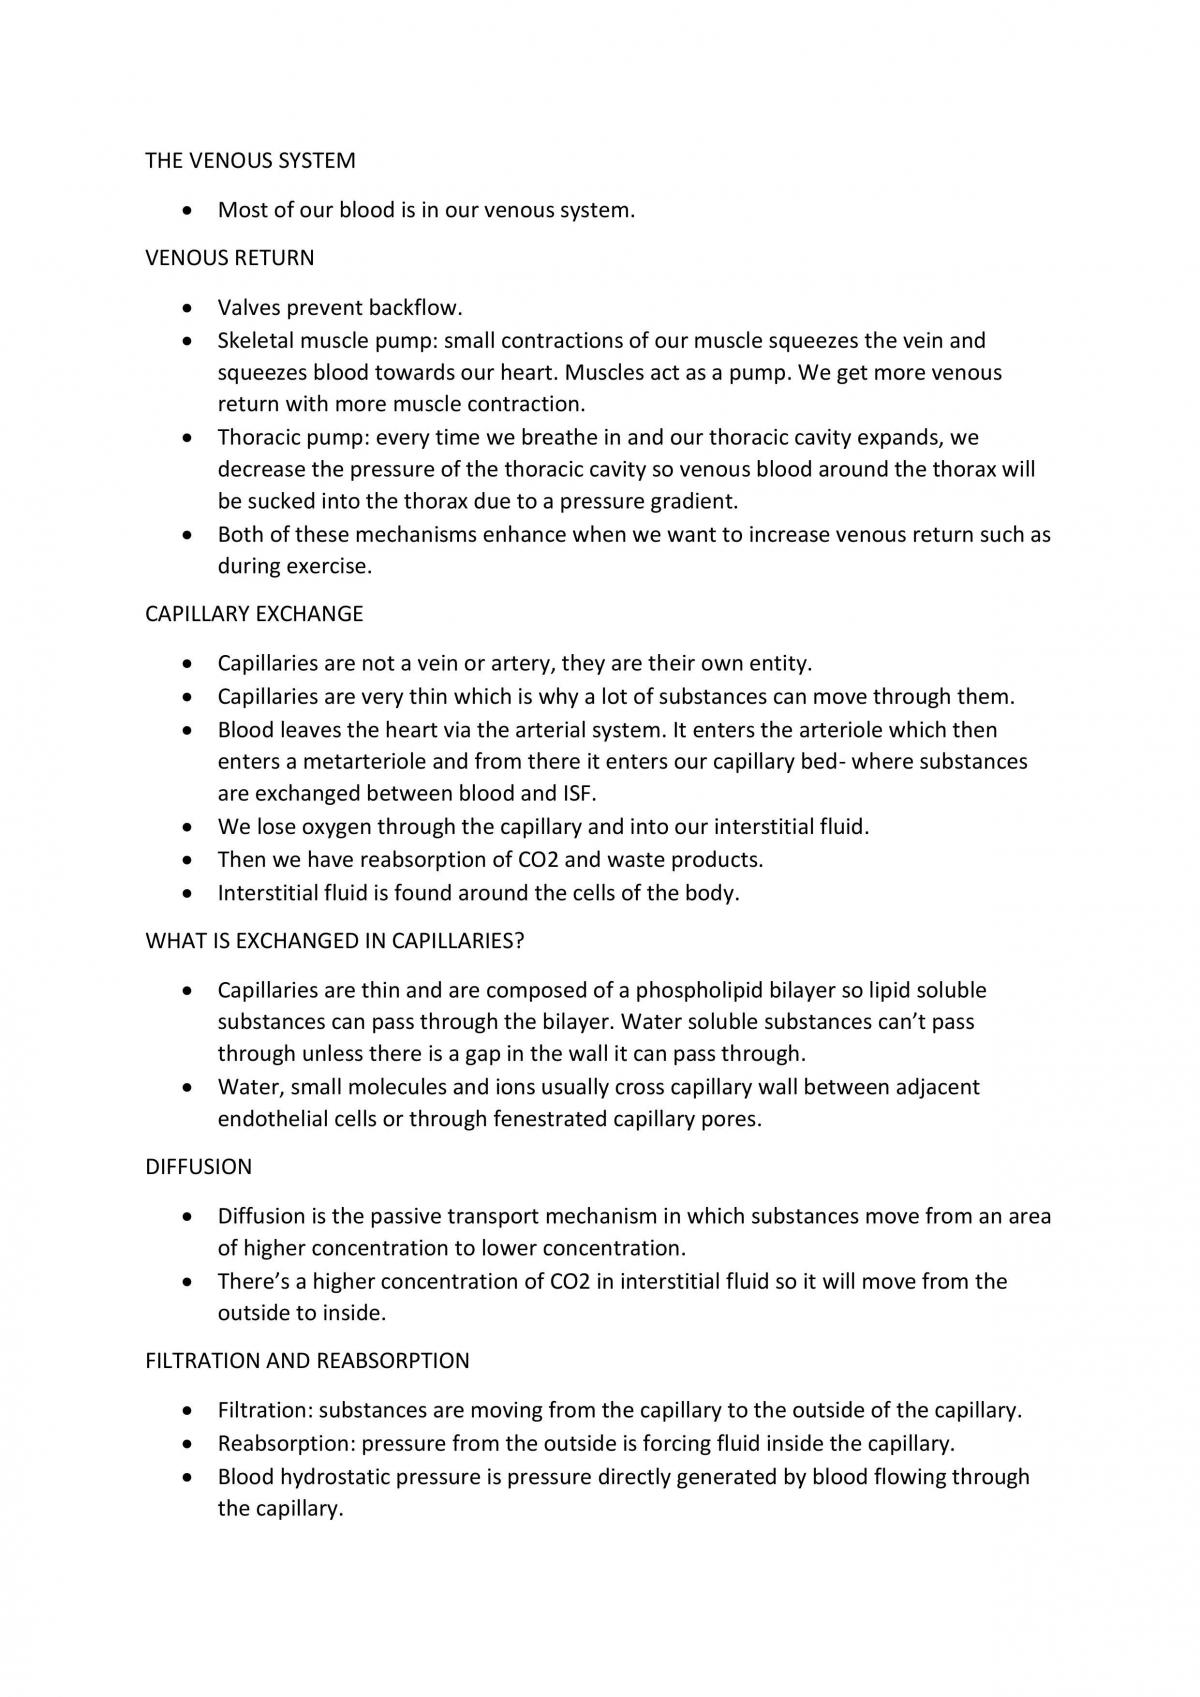 301353 Study Notes - Page 26